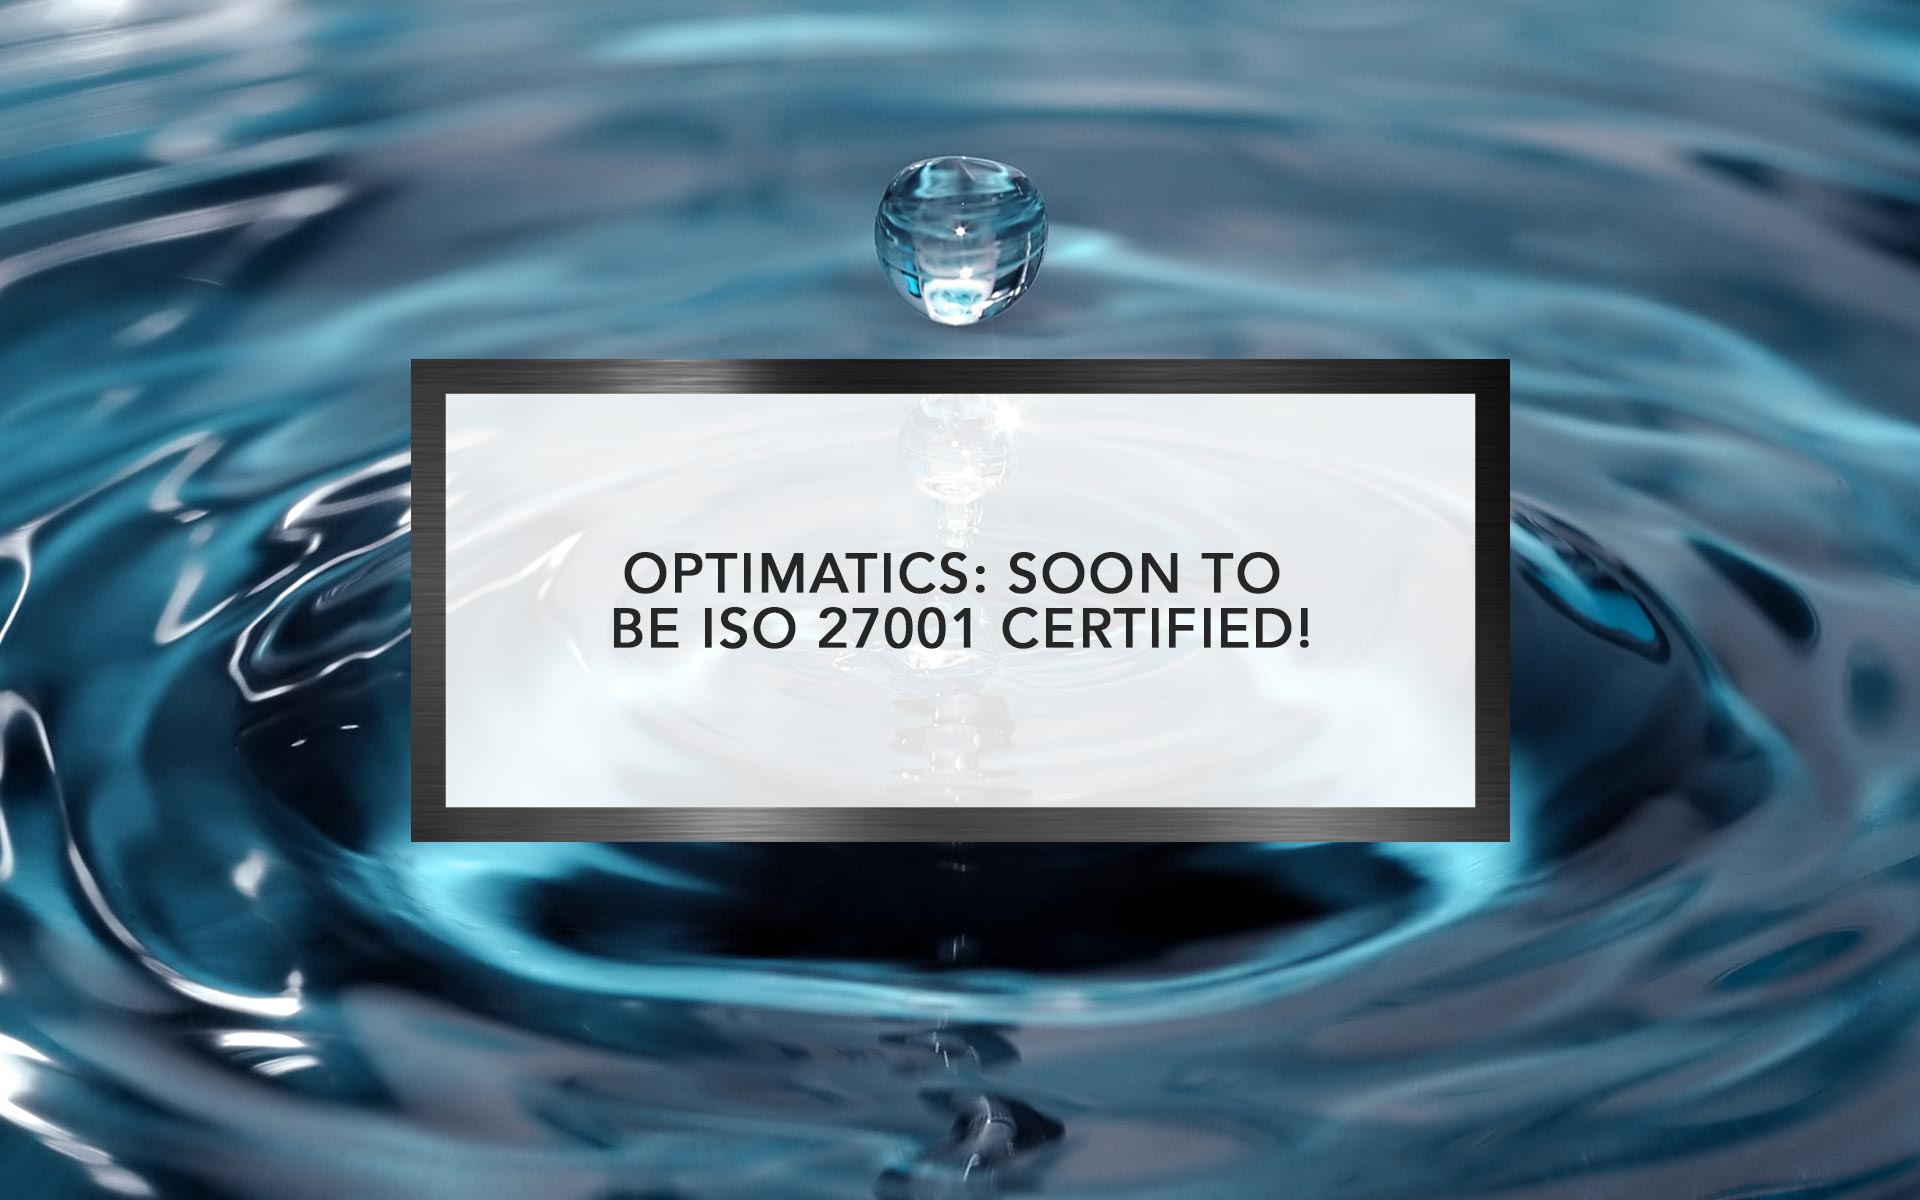 Soon to be ISO 27001 Certified! | Optimatics